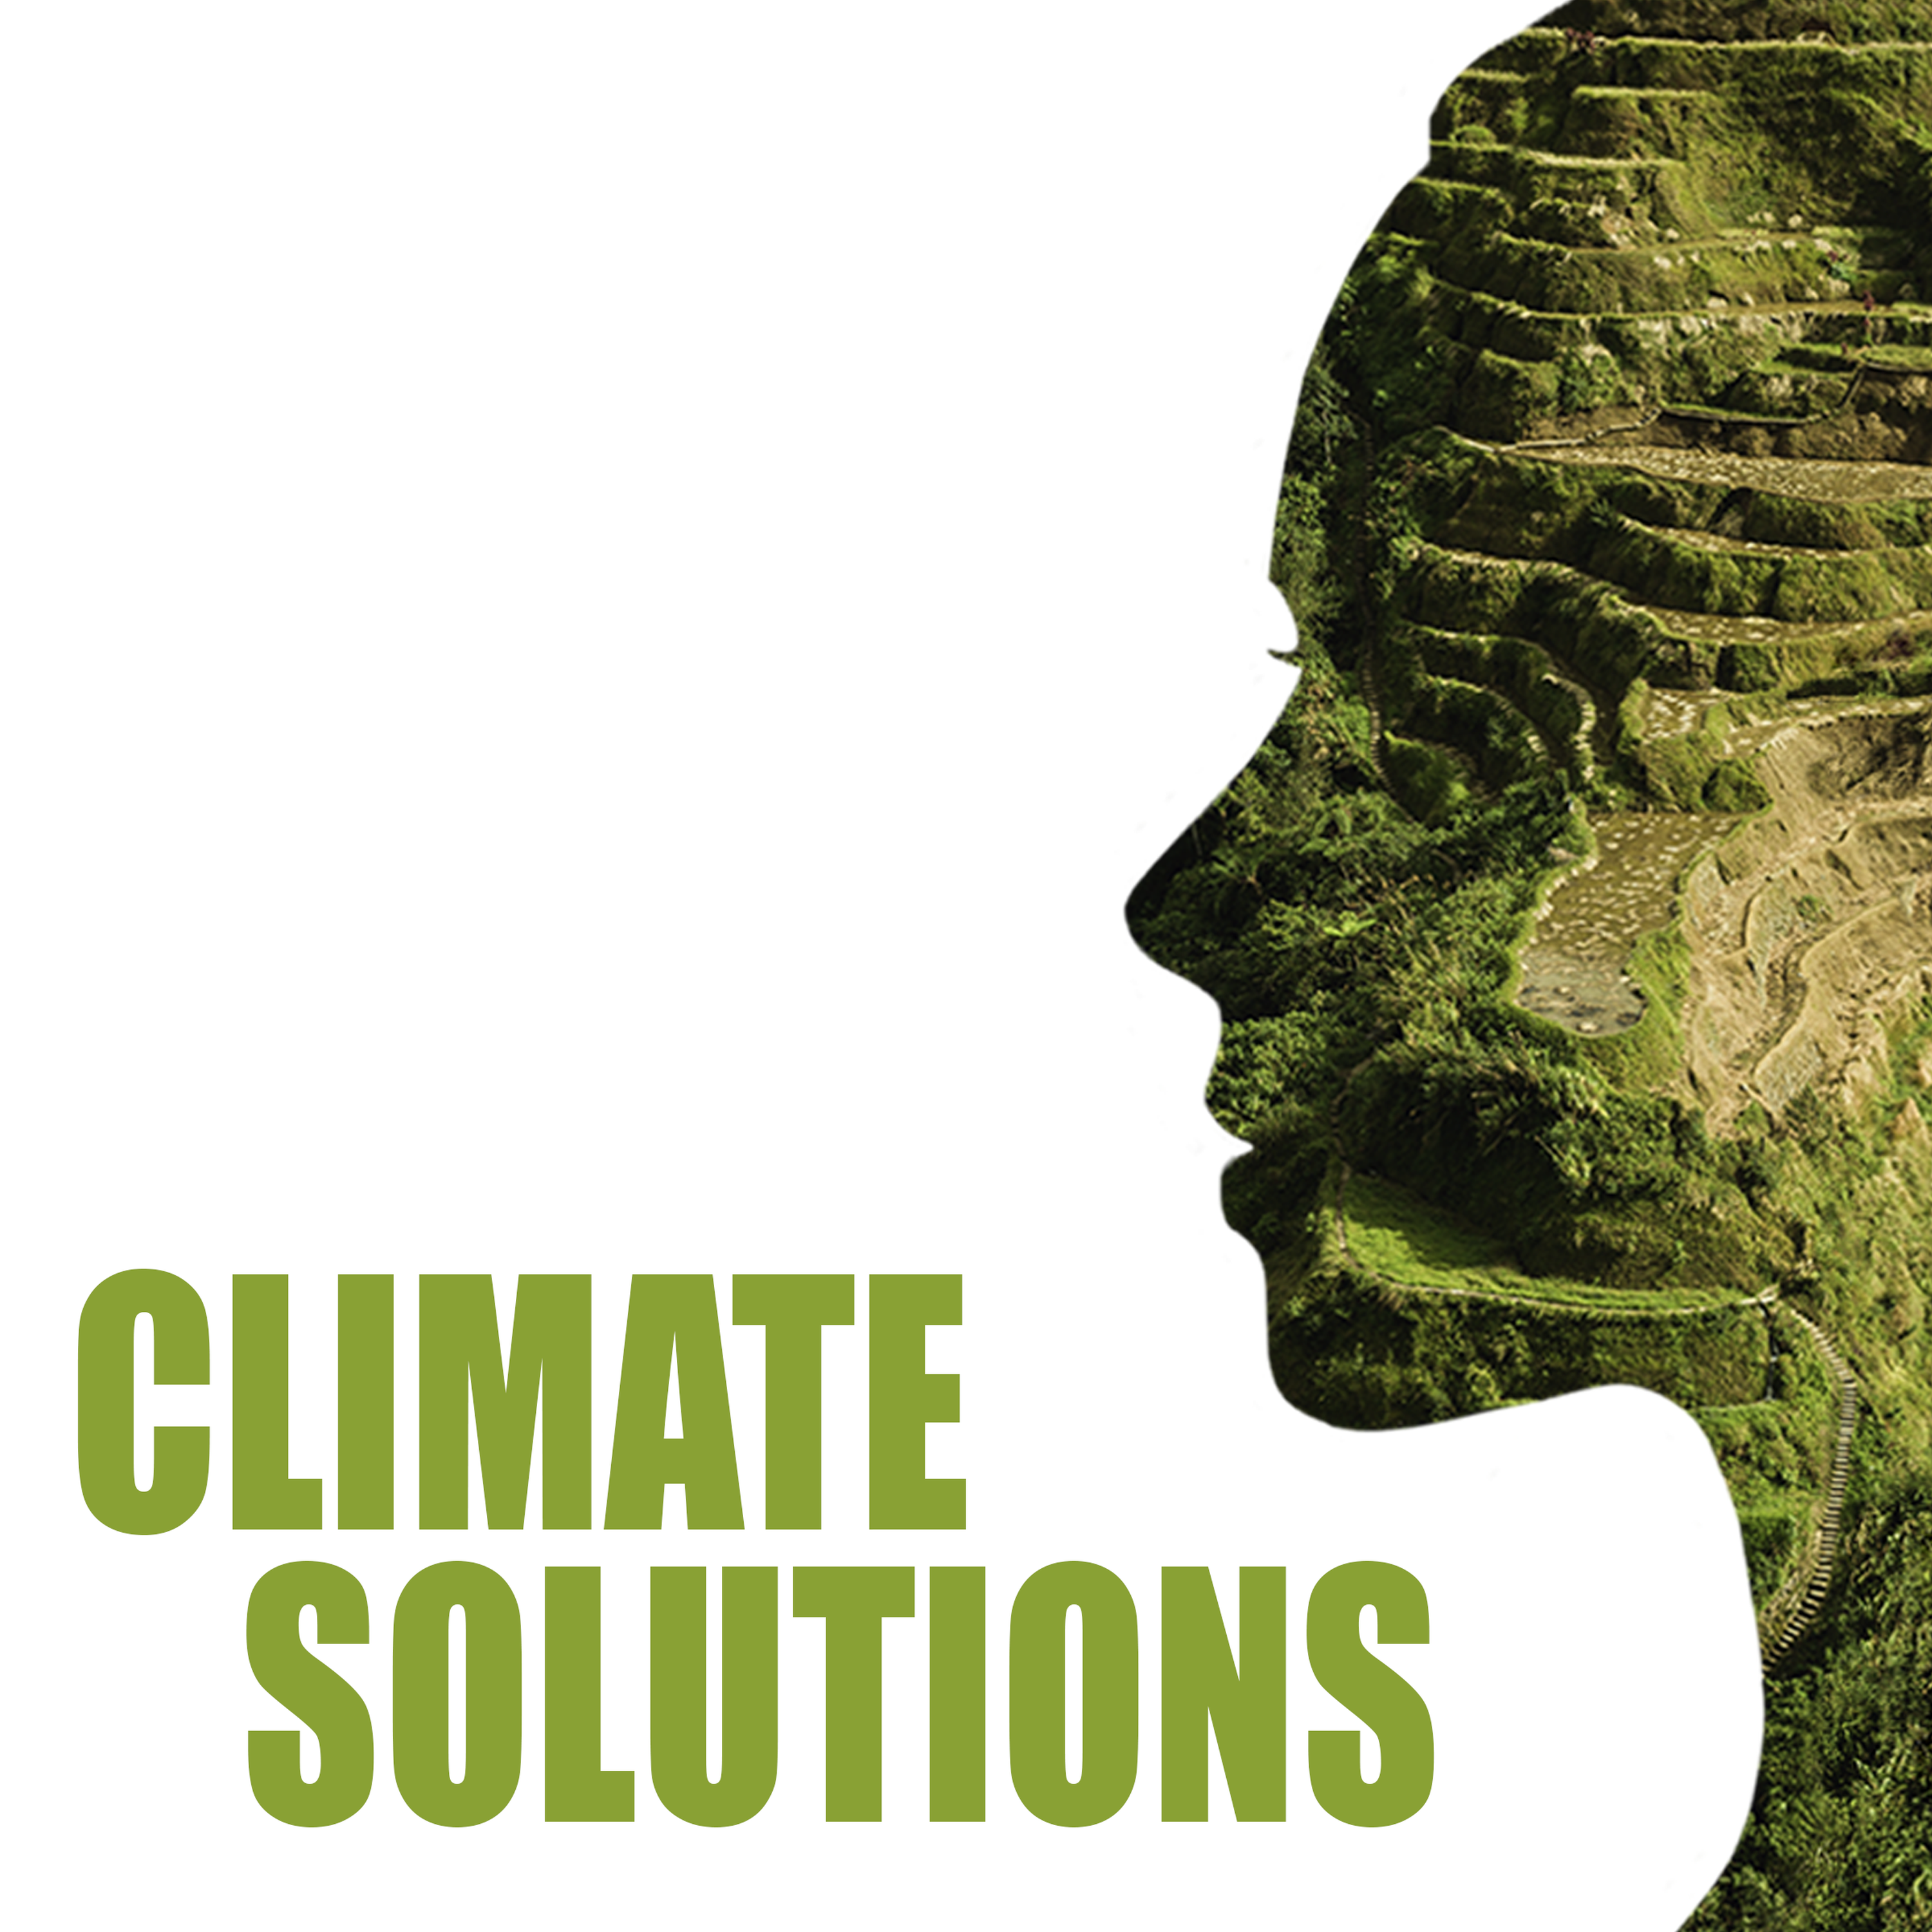 Climate Solutions season 3 is now available in French, German, Italian and Spanish!